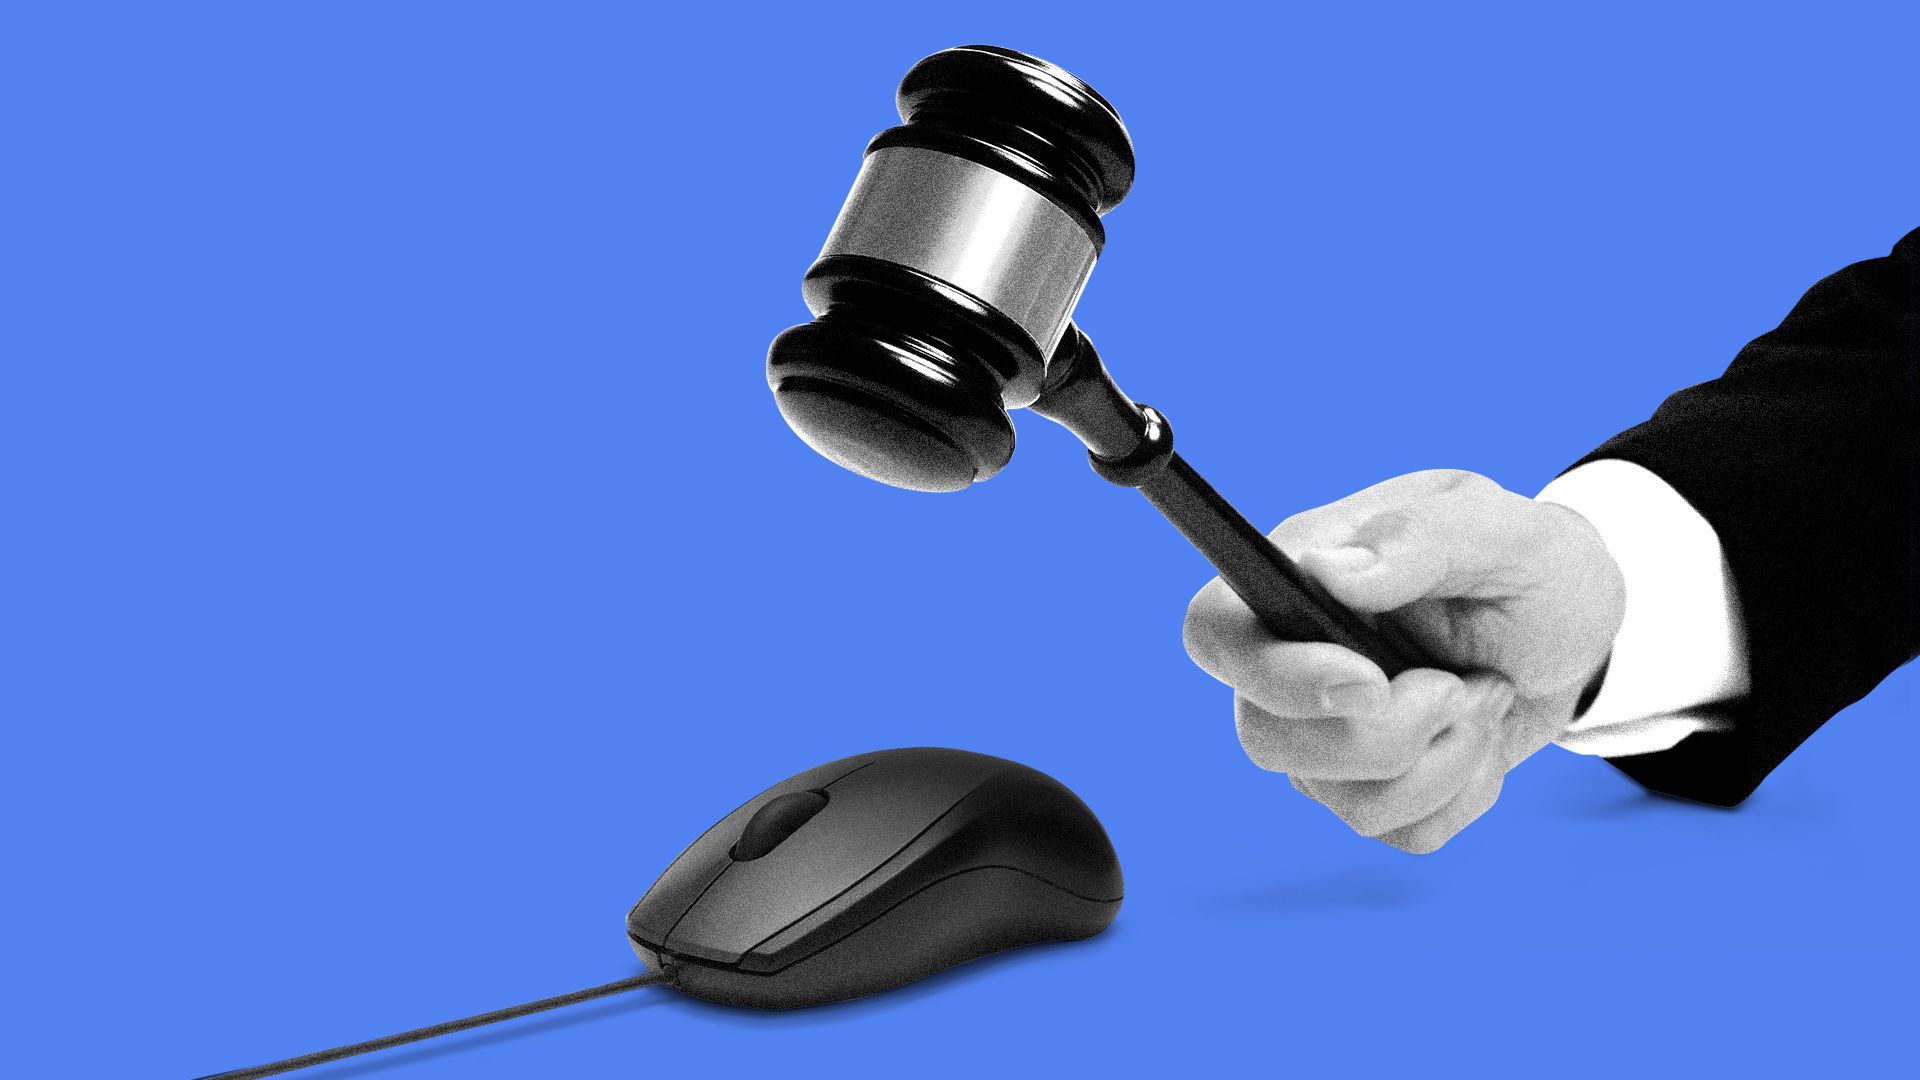 Illustration of a hand holding a gavel that is about to slam down on a computer mouse. 